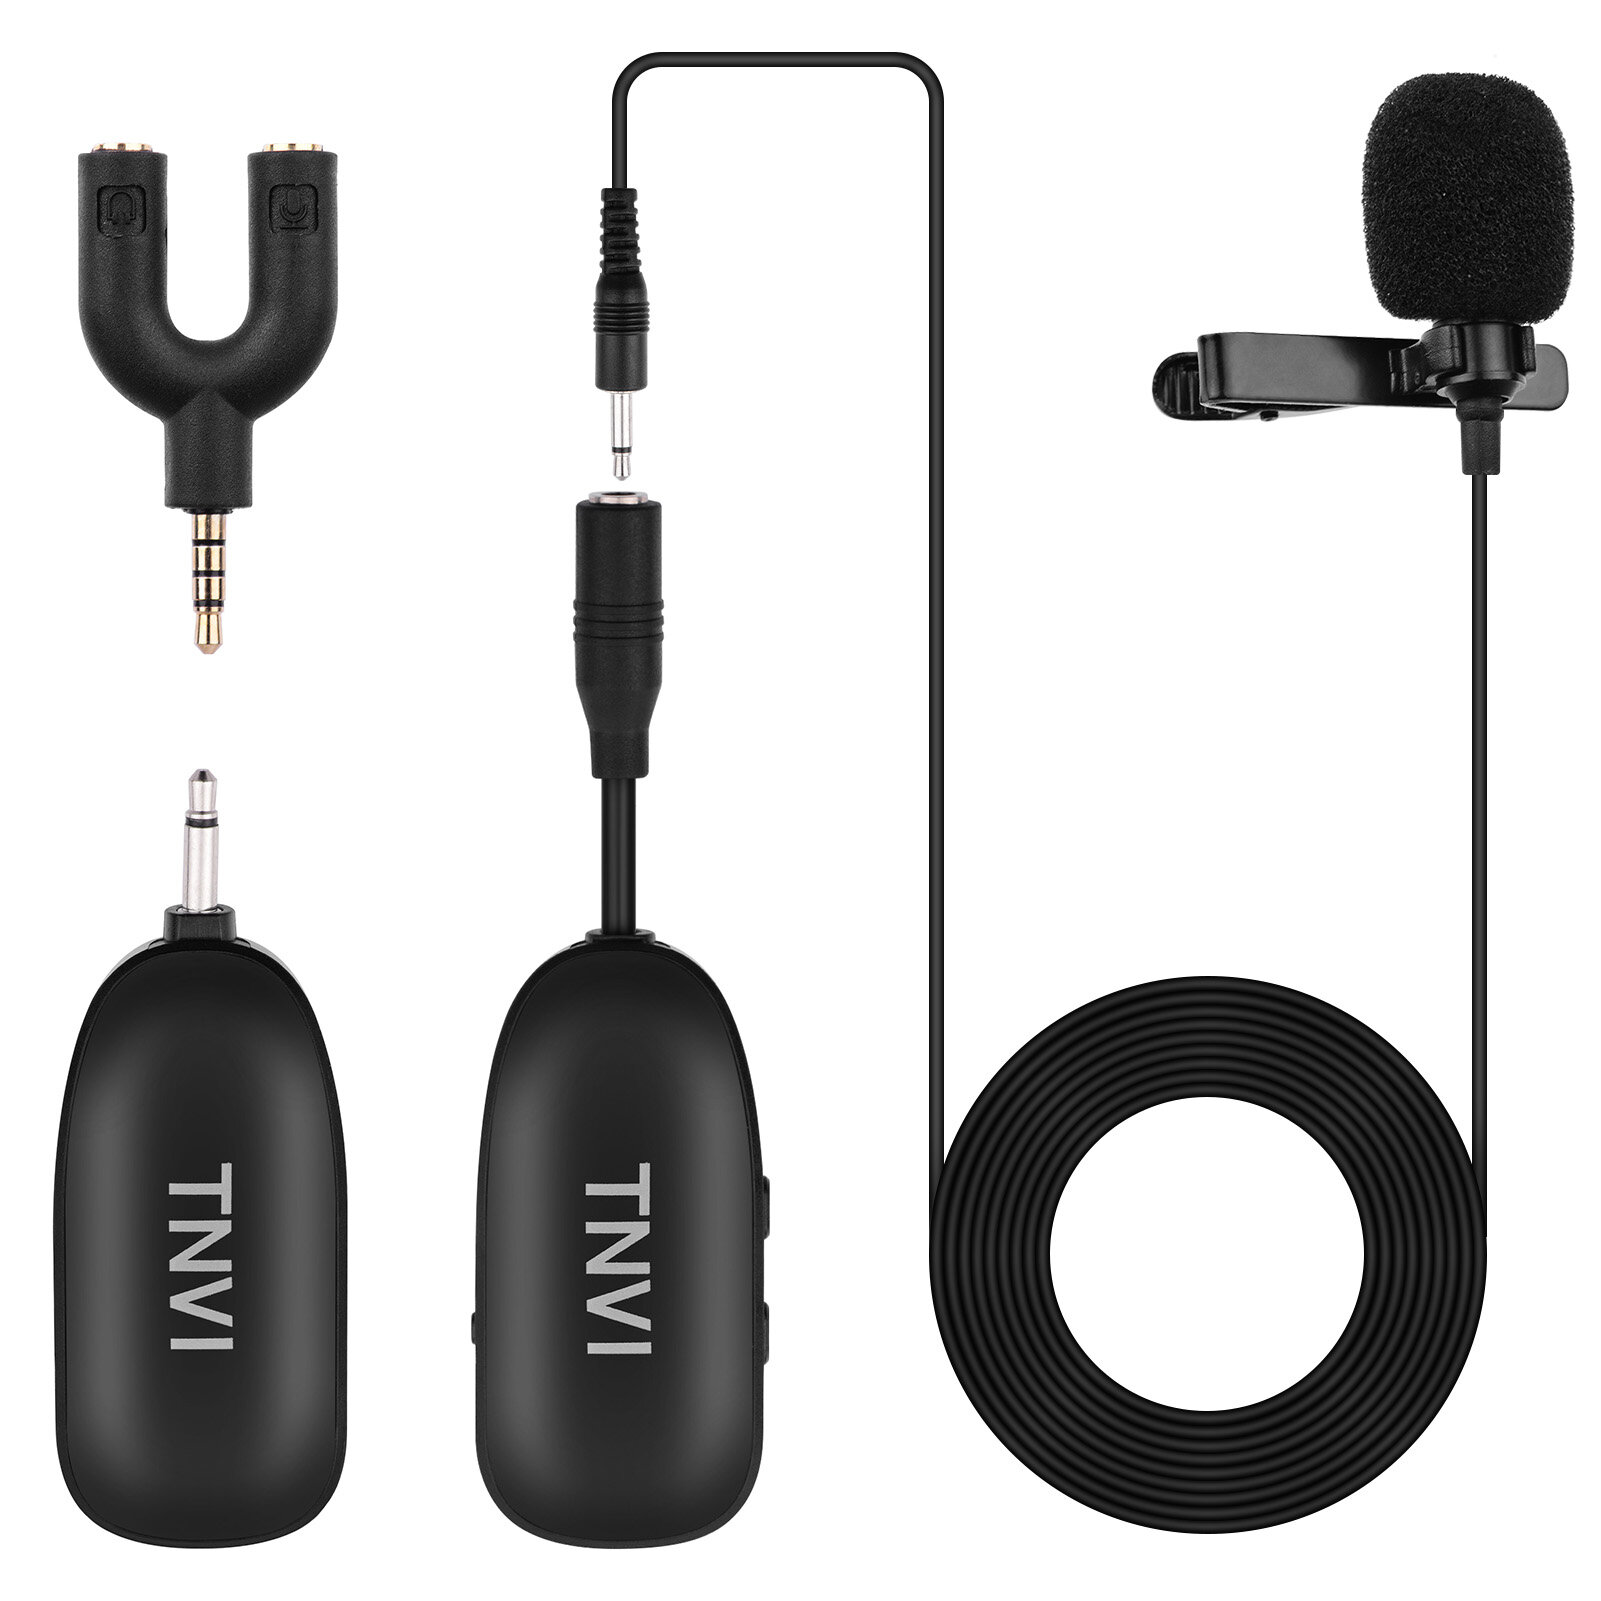 TNVI V1 2.4G Wireless Microphone System with Rechargeable Transmitter Reveiver Lapel Lavalier Microphone for Smartphone